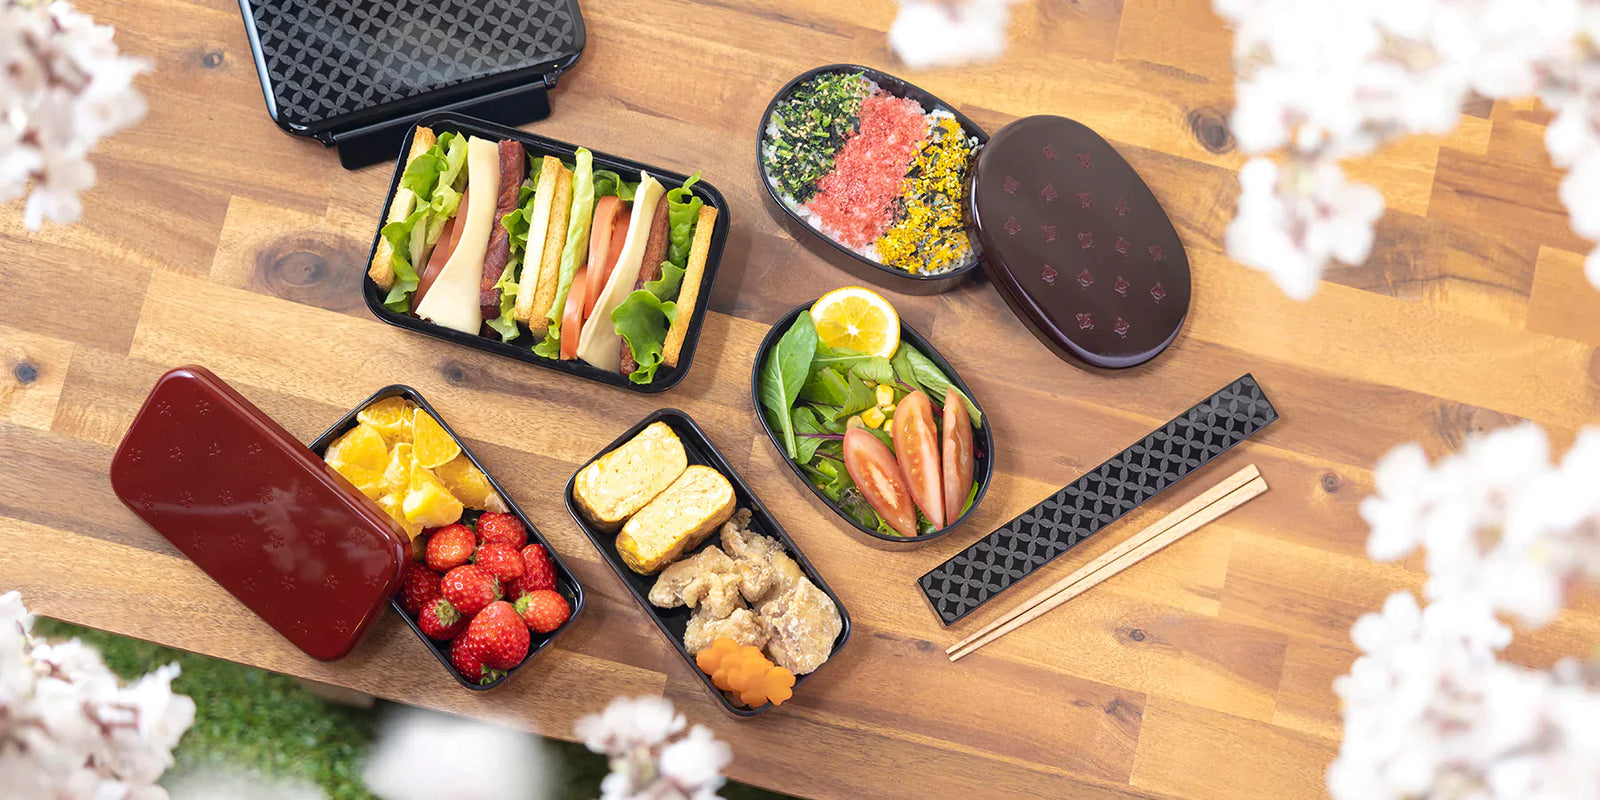 OSK Waon 2-Tier Nestable Bento Lunch Box with Chopsticks & Lunch